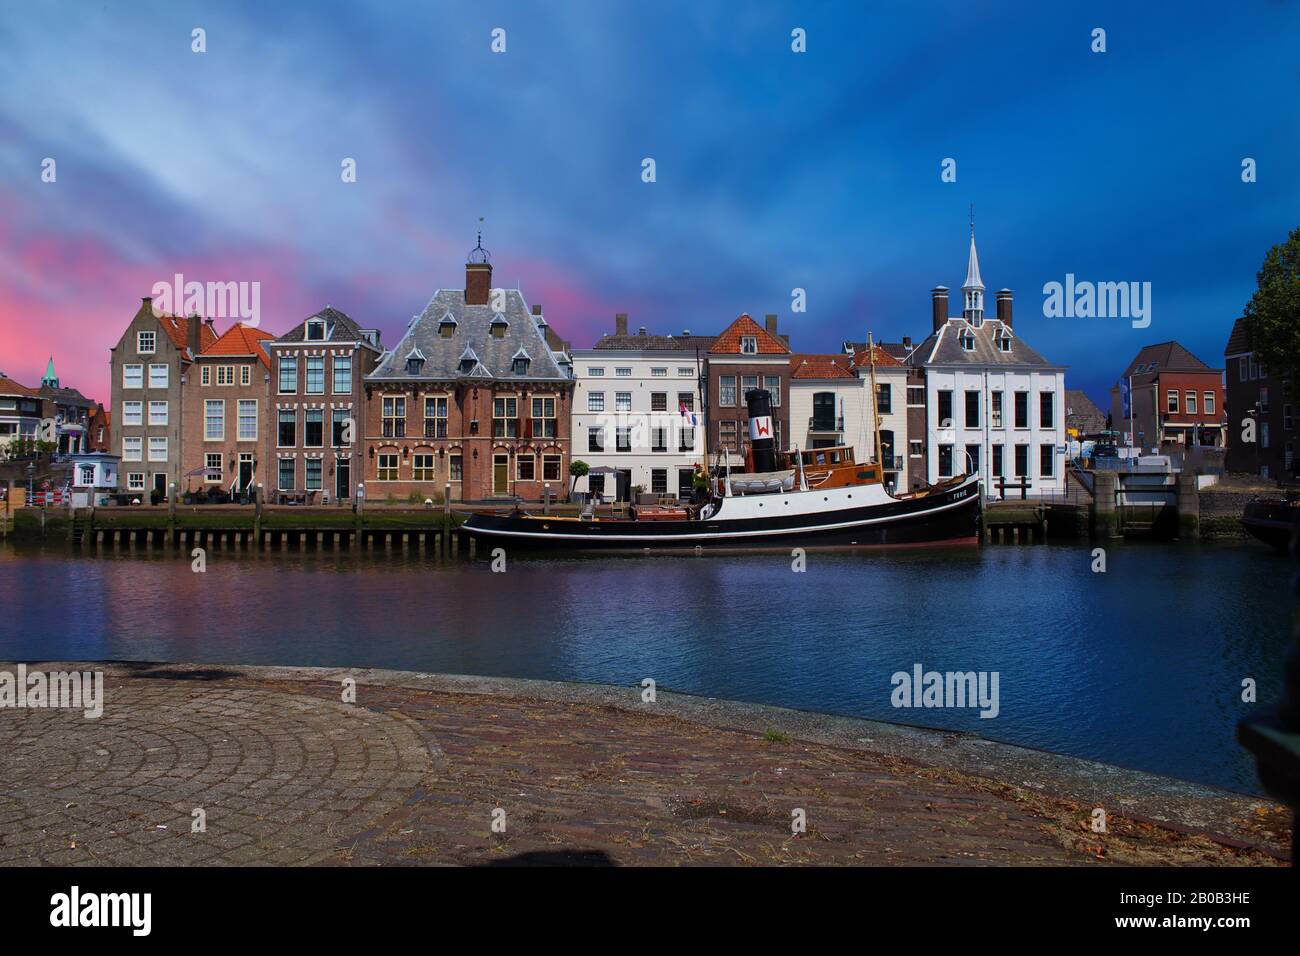 Maassluis, The Netherlands - February 21, 2018: the harbor of Maassluis with old boats, tugs and monumental houses in the evening. Stock Photo